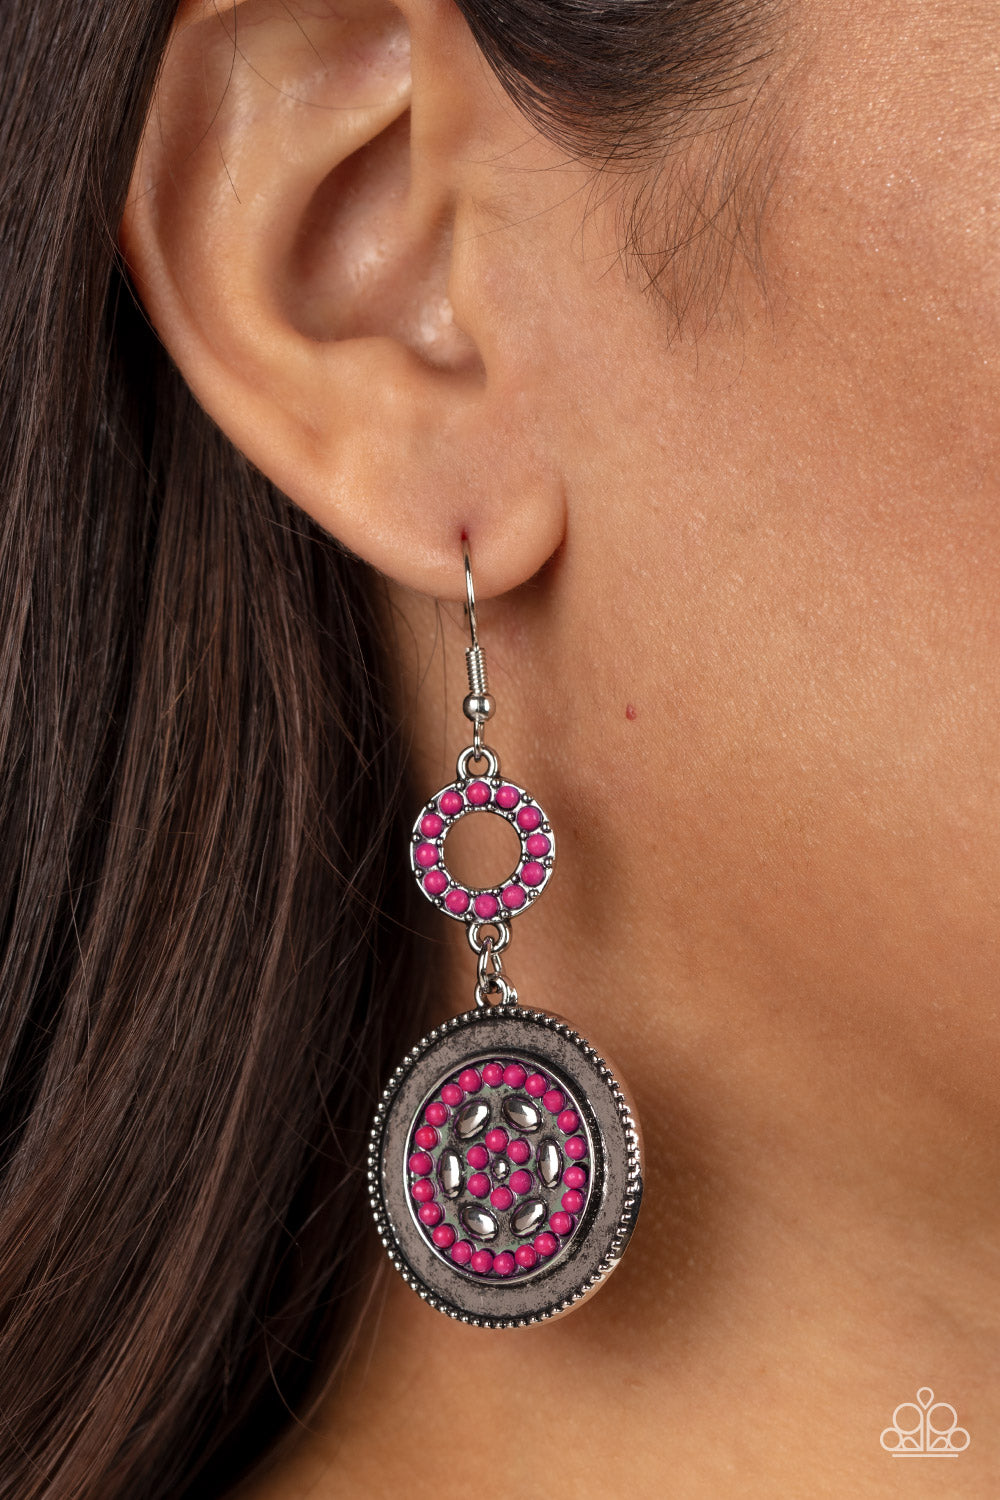 Meadow Mantra - Pink and Silver Earrings - Paparazzi Accessories - Dotted in dainty Fuchsia Fedora seed beads, a dainty silver hoop links to an ornate silver disc for a colorful floral finish. Earring attaches to a standard fishhook fitting. Sold as one pair of earrings.